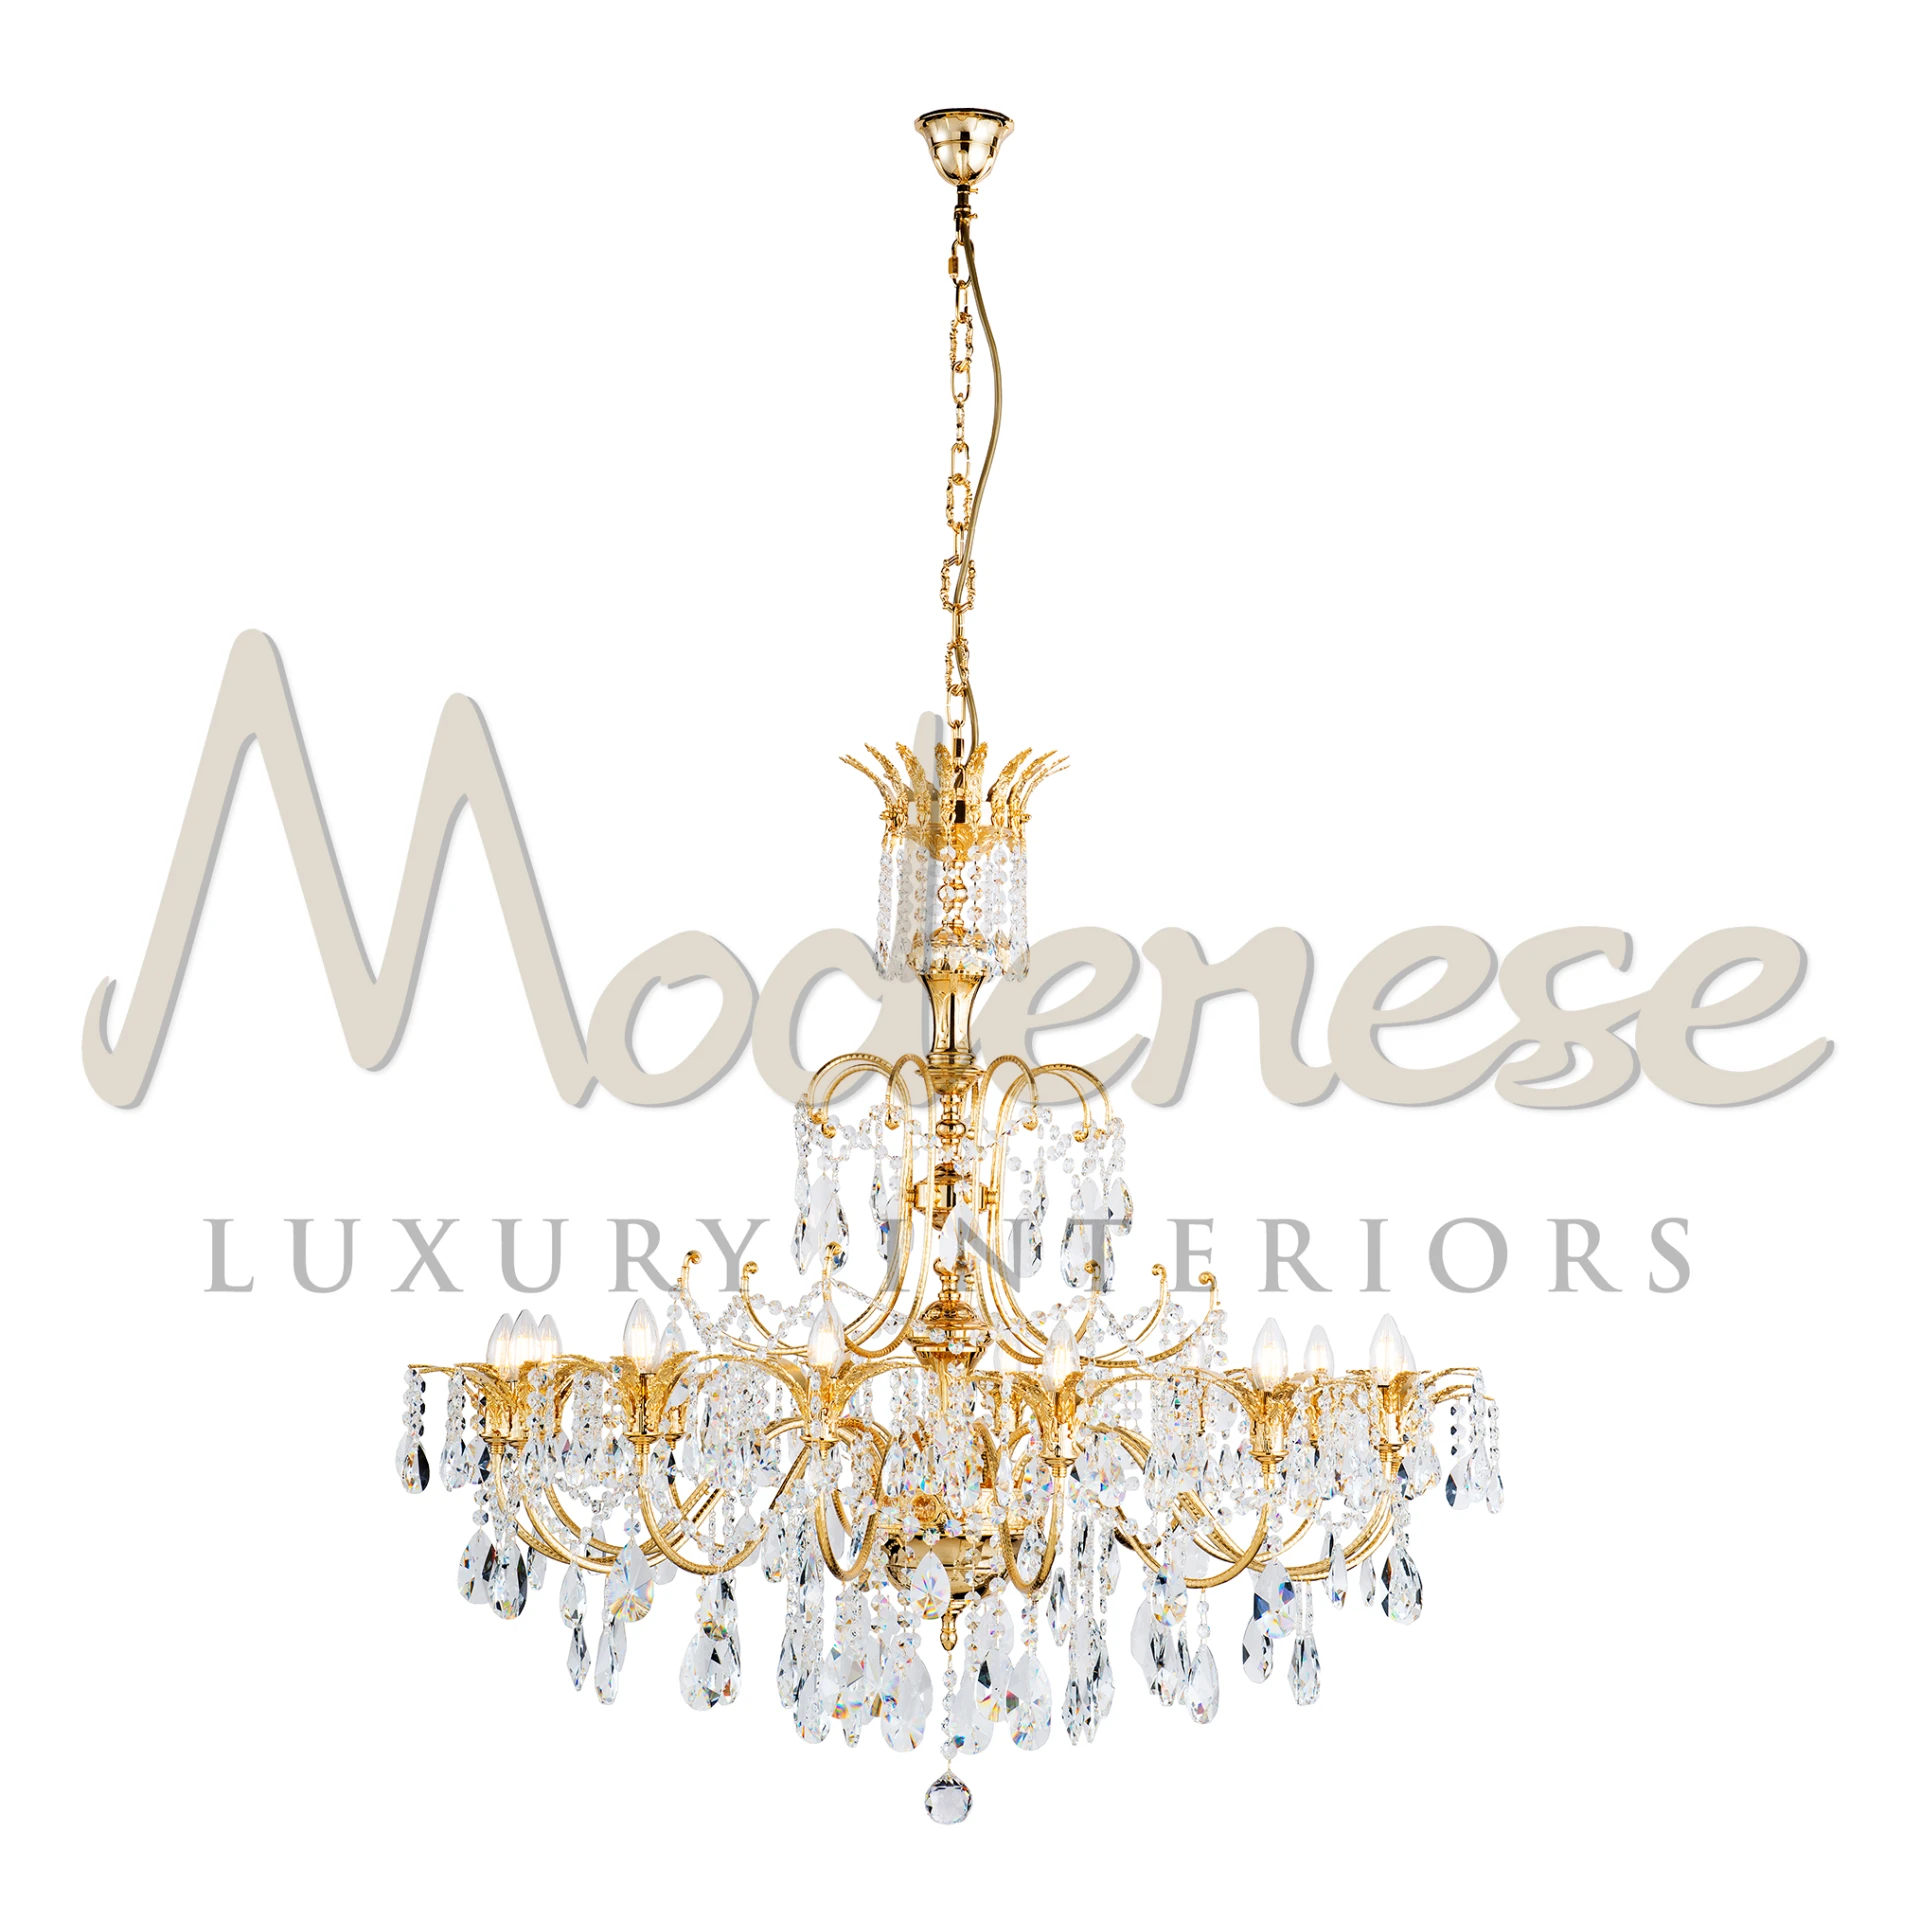 Magnificent 'Luxury Italian Empire Chandelier' with intricate gold details and shimmering crystal ornaments